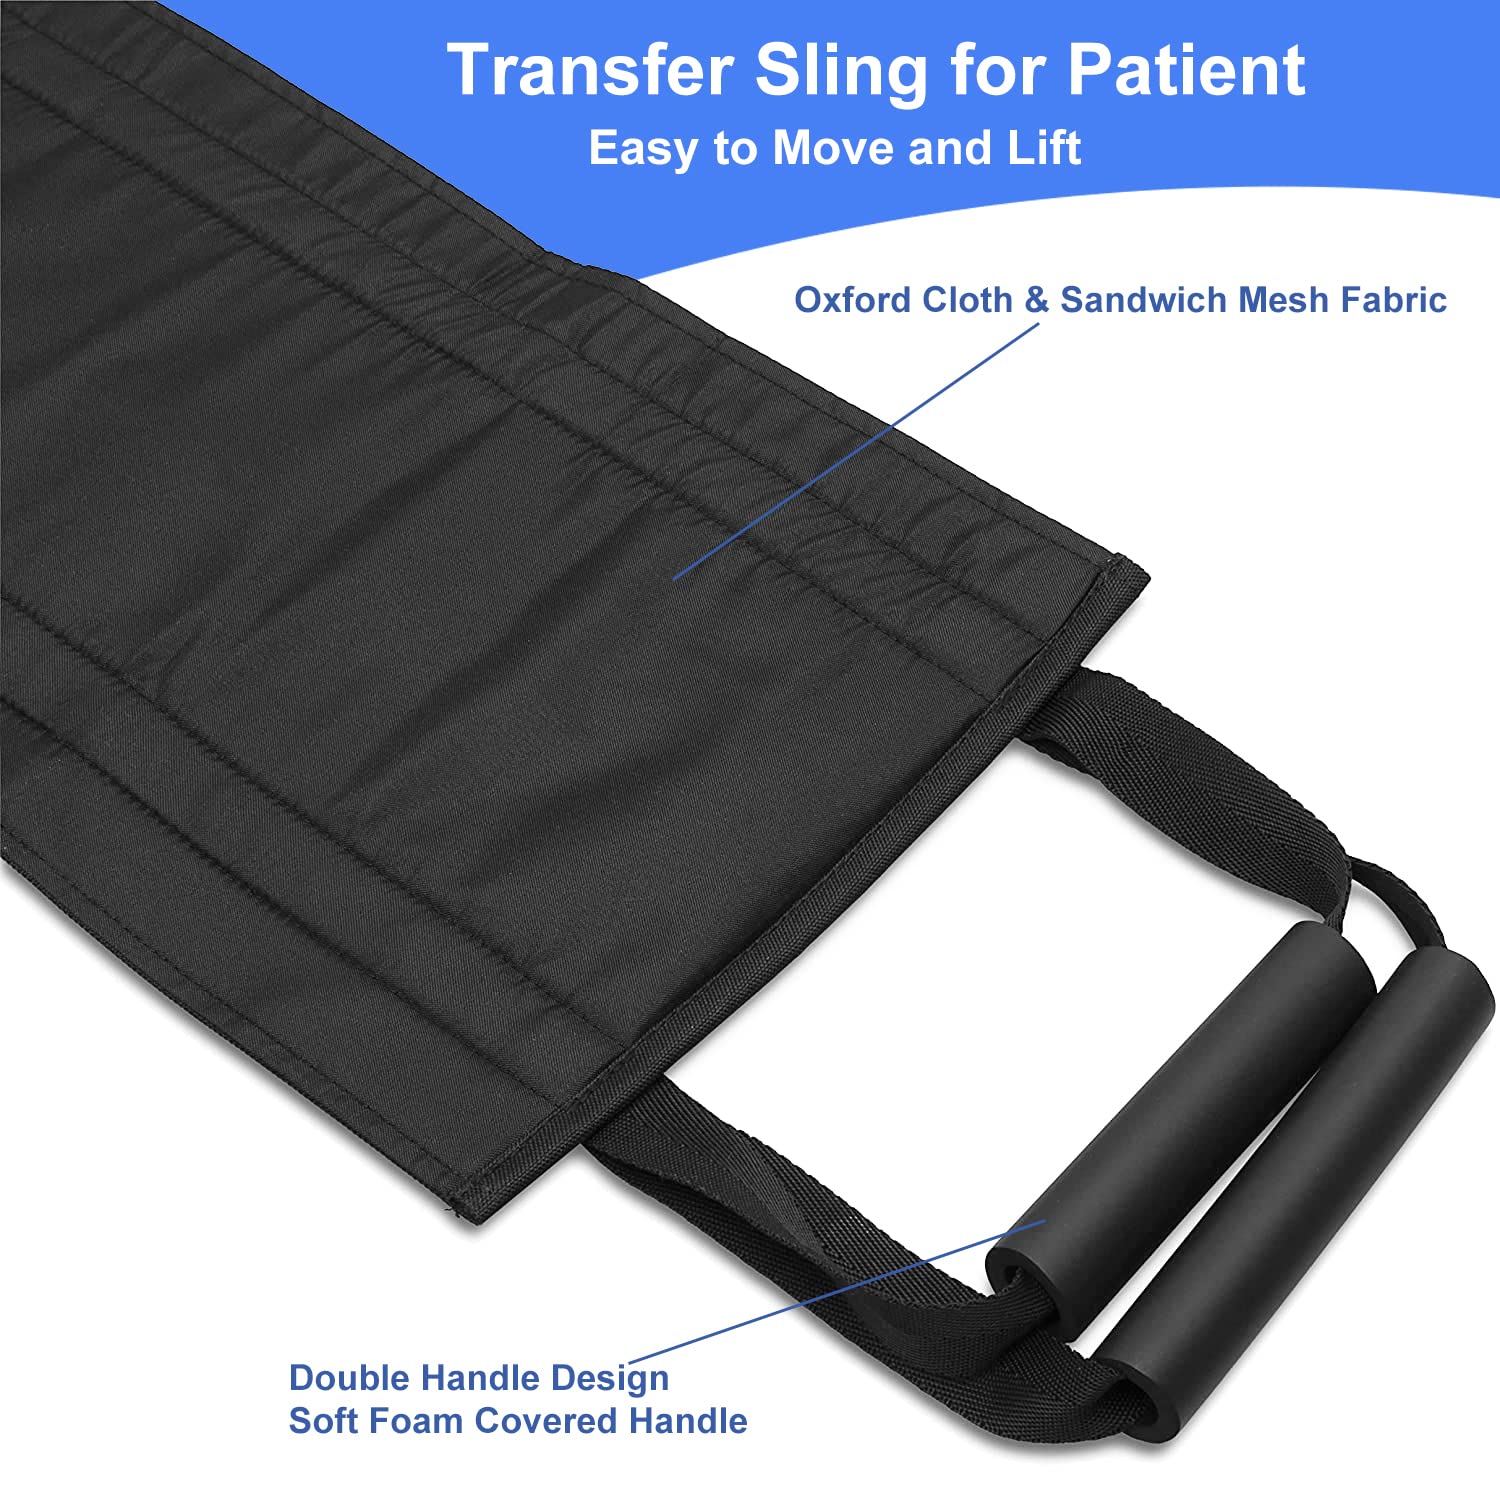 DJCLADUO Padded Bed Transfer Nursing Sling with 4 Handles for Patient, Belt Lifting Patient 31.5 Inch Elderly Safety Lifting Aids Home Bed Assist Handle Back Lift Mobility Belt